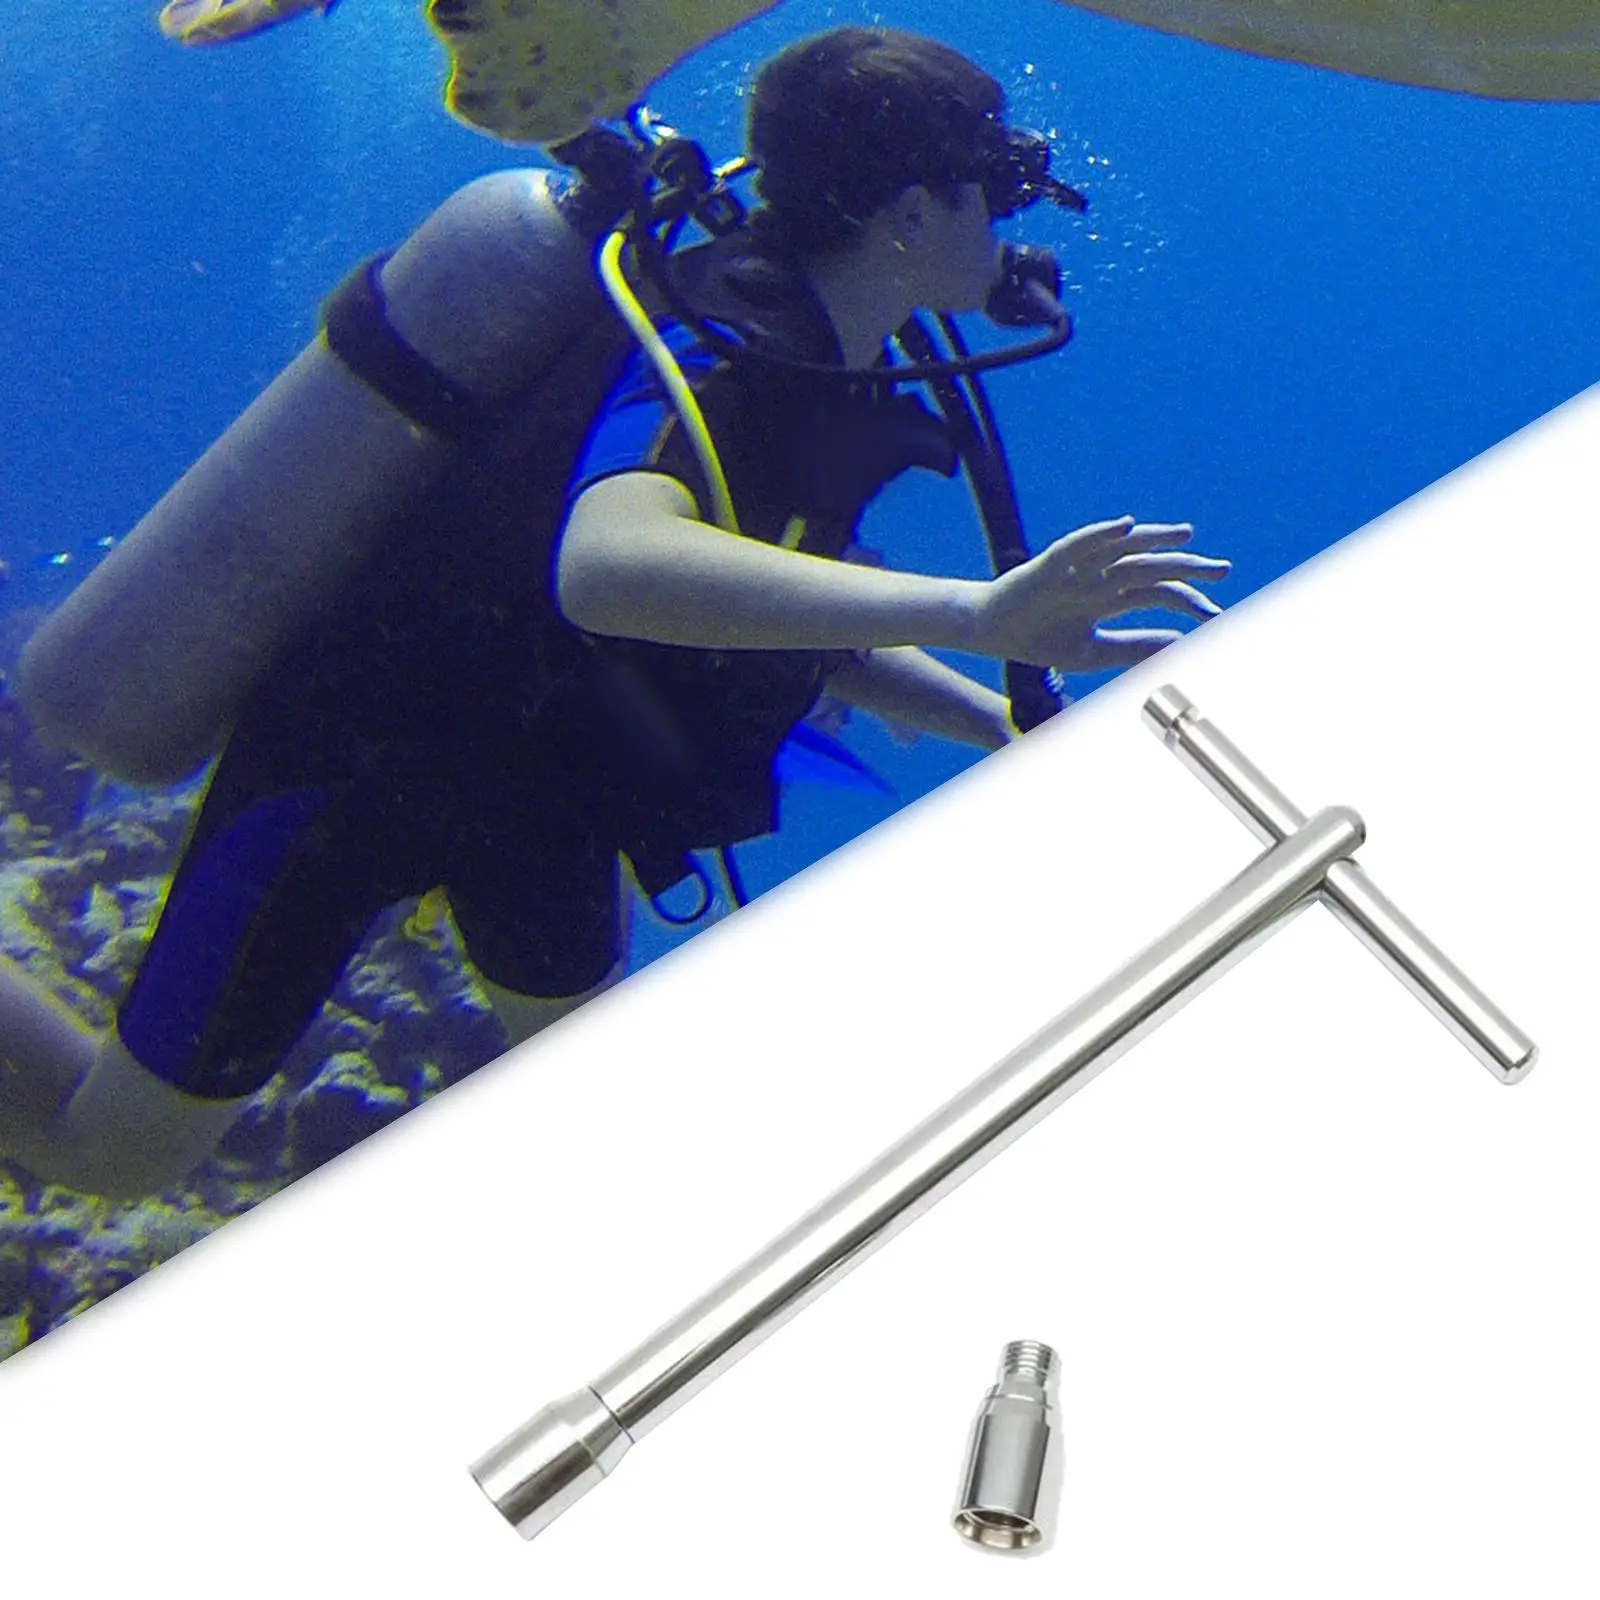 150mm Hose Protector Tool Durable Lightweight High Pressure Hand Install for Scuba Diving Gear Accessories Self Draining